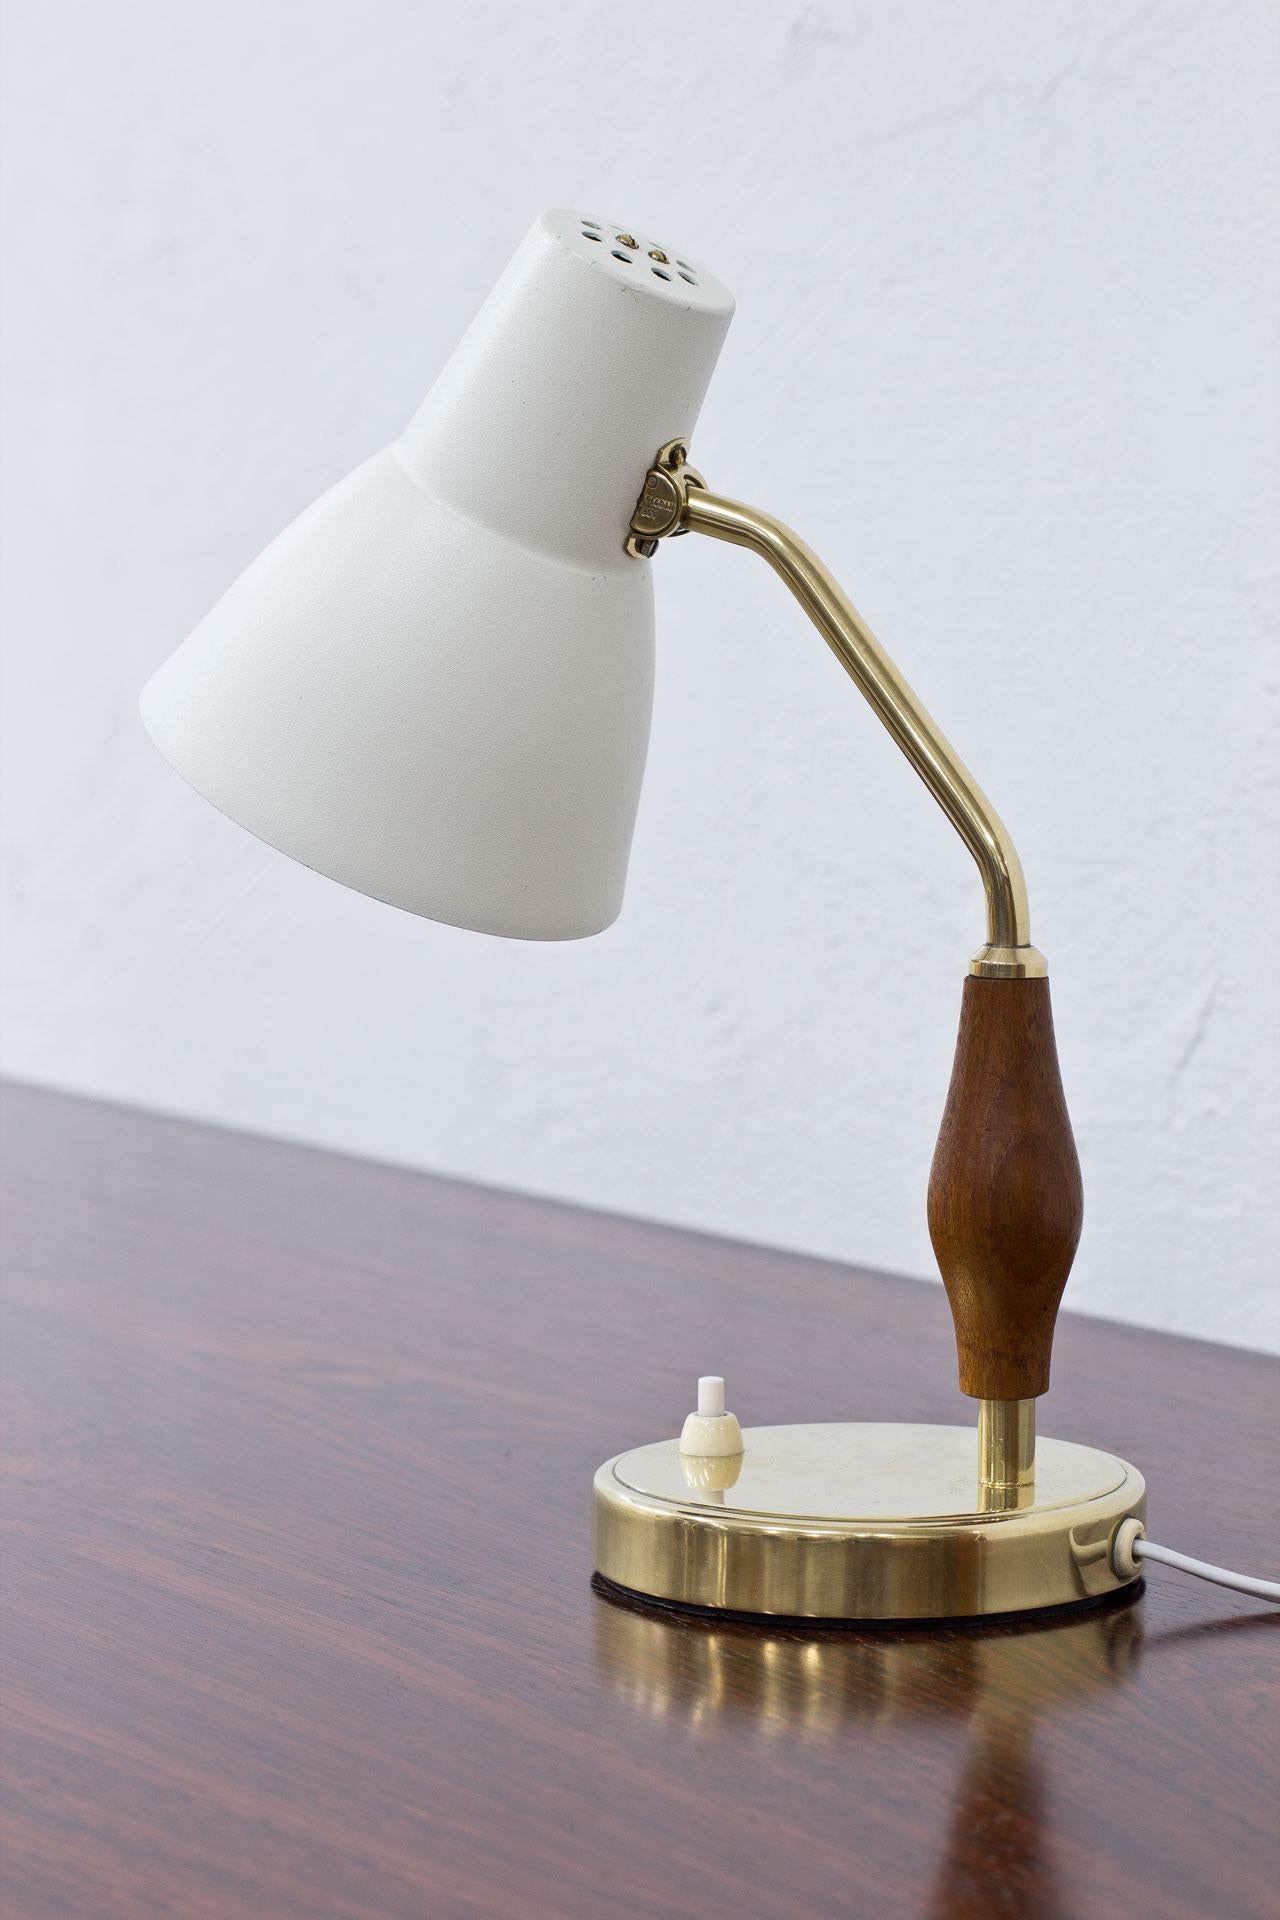 Neat desk/ table lamp designed by Hans Bergström, manufactured by ASEA in Sweden during the 1950s.
Off-white lacquered metal shade, brass base and sculpted teak handle. 
Rewired.